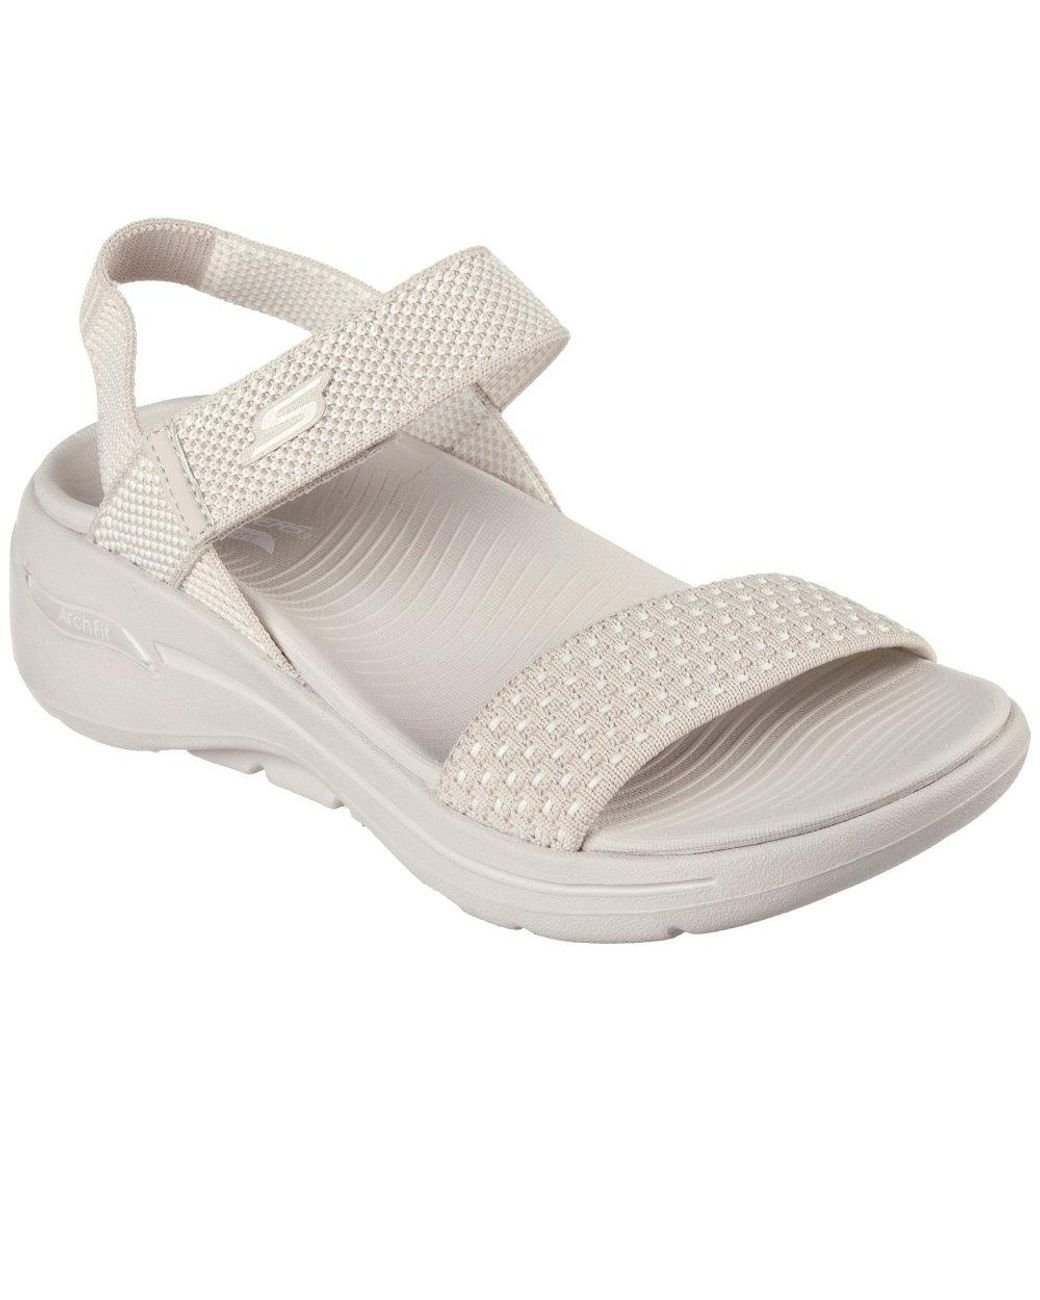 Skechers Go Walk Arch Fit Polished Sandals in Natural | Lyst Australia